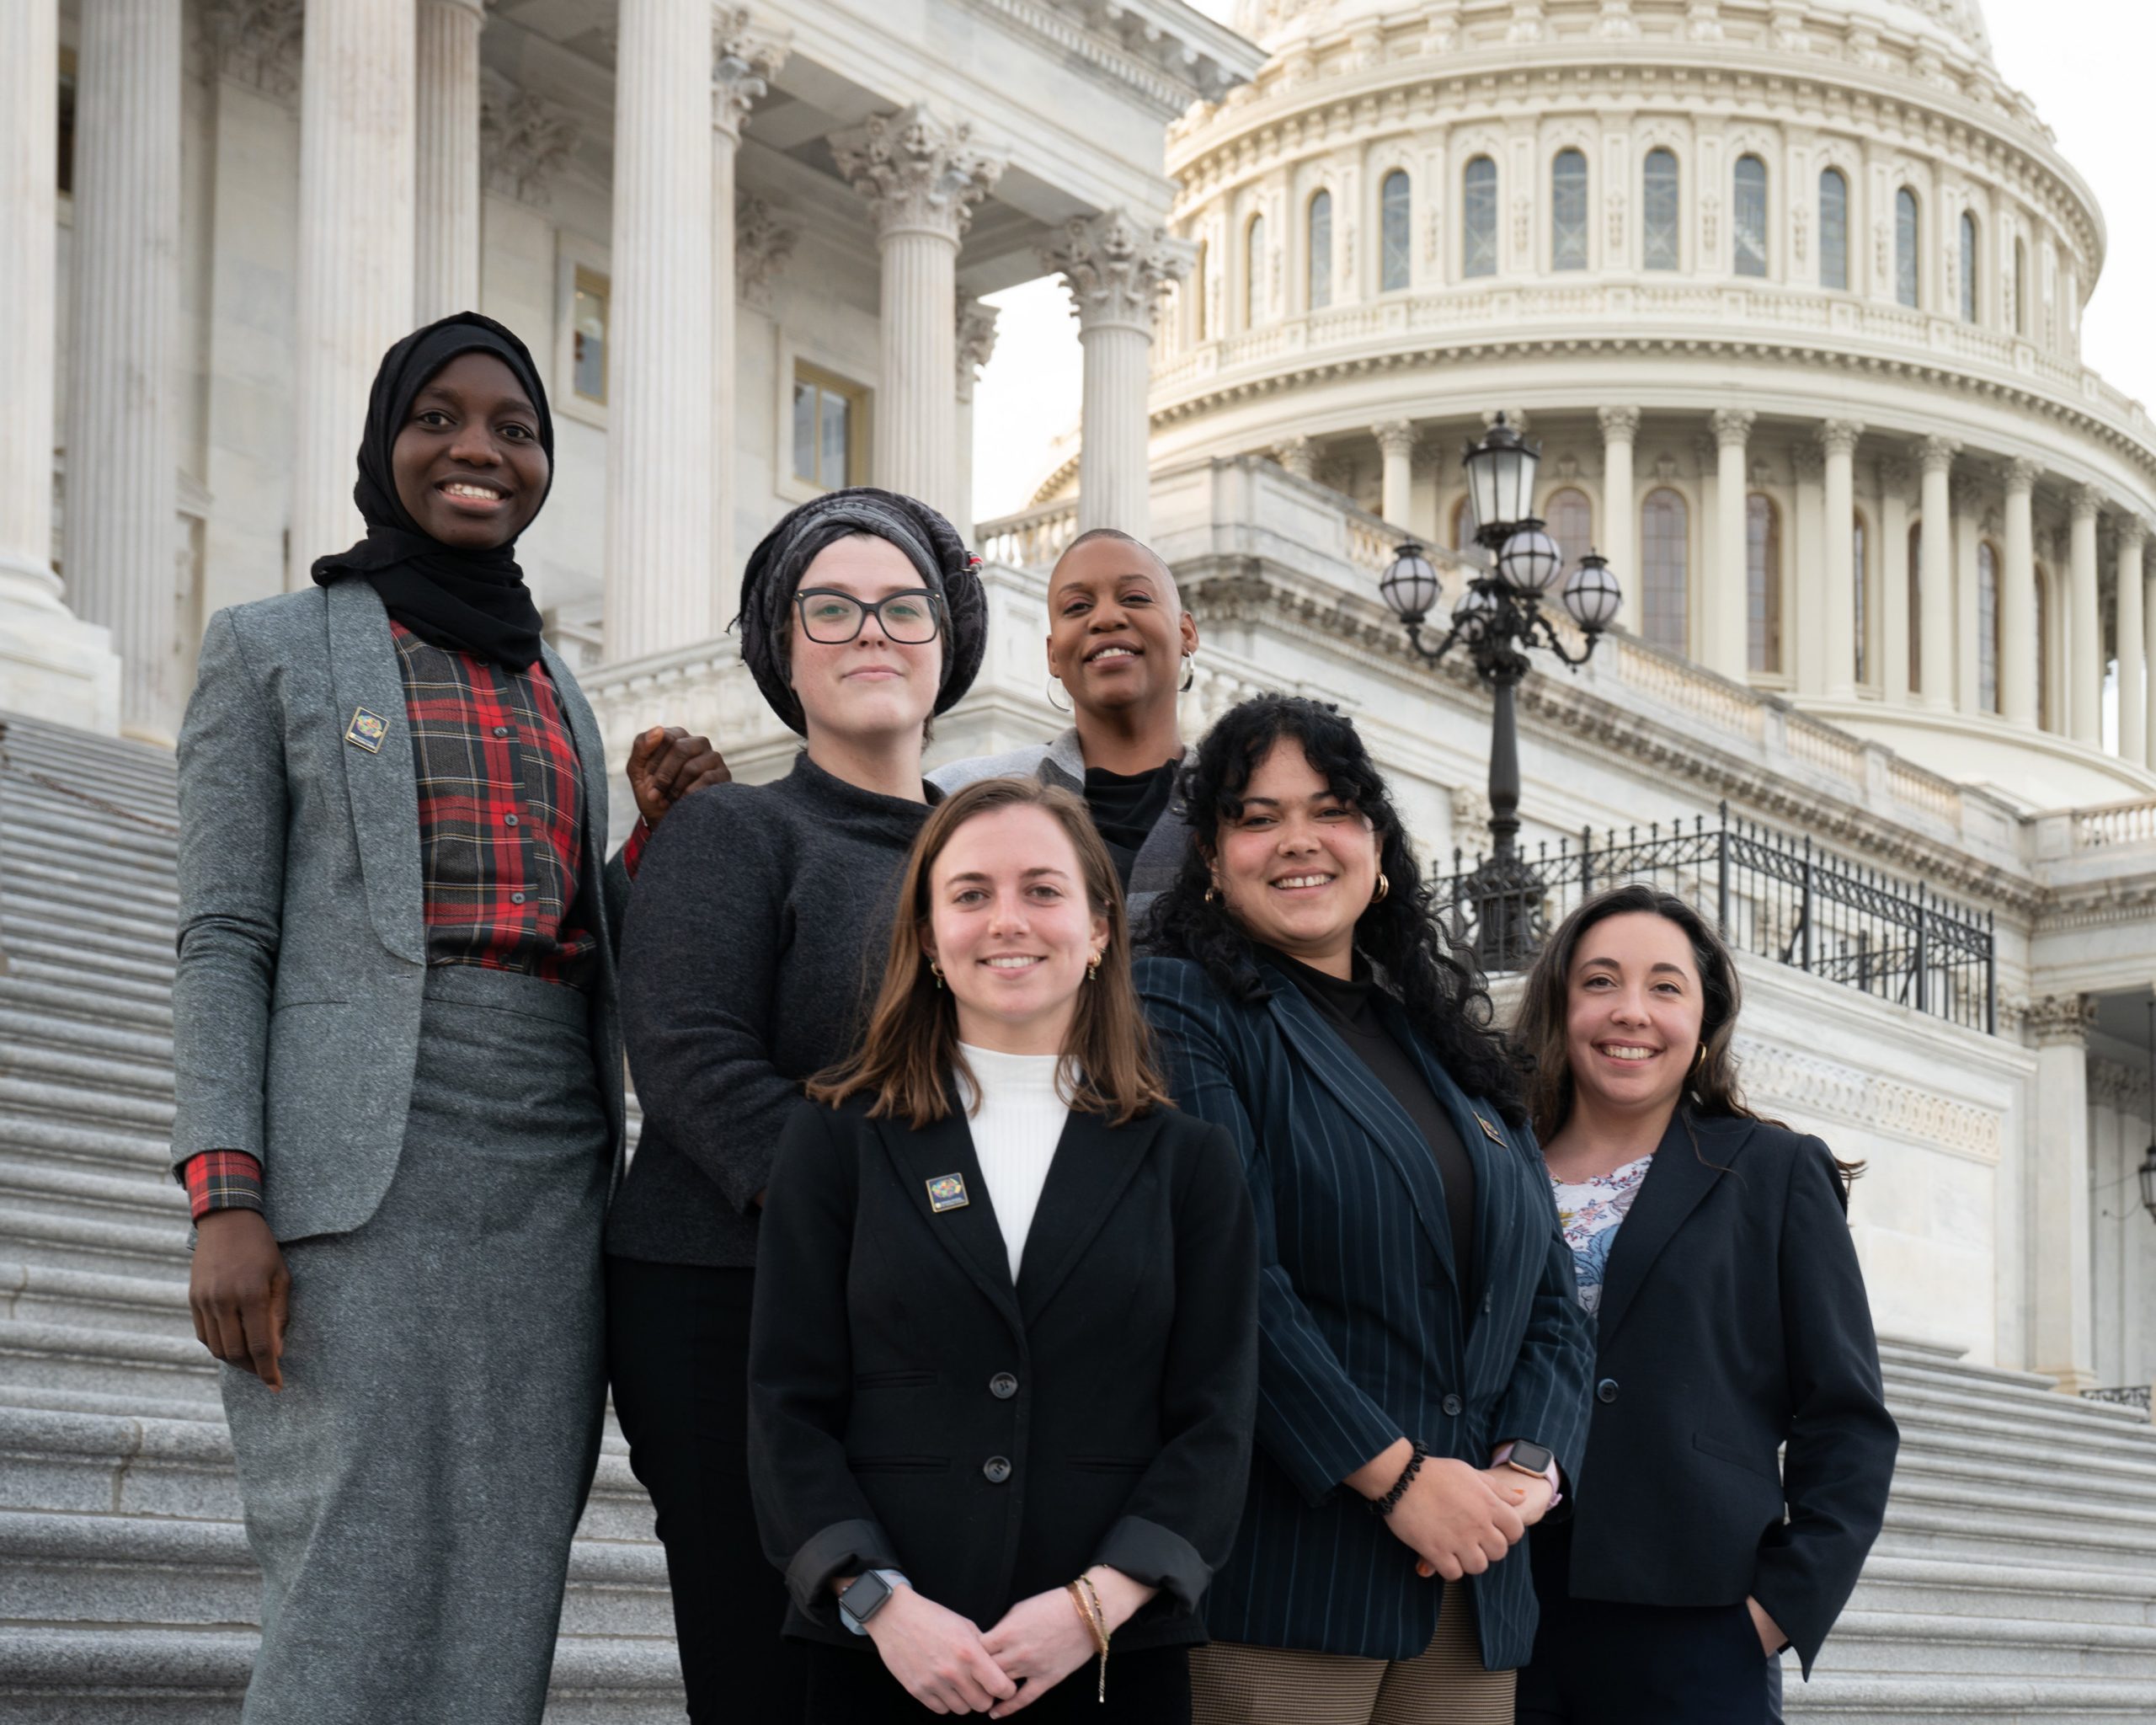 Six women standing on the steps of the US Capitol building.